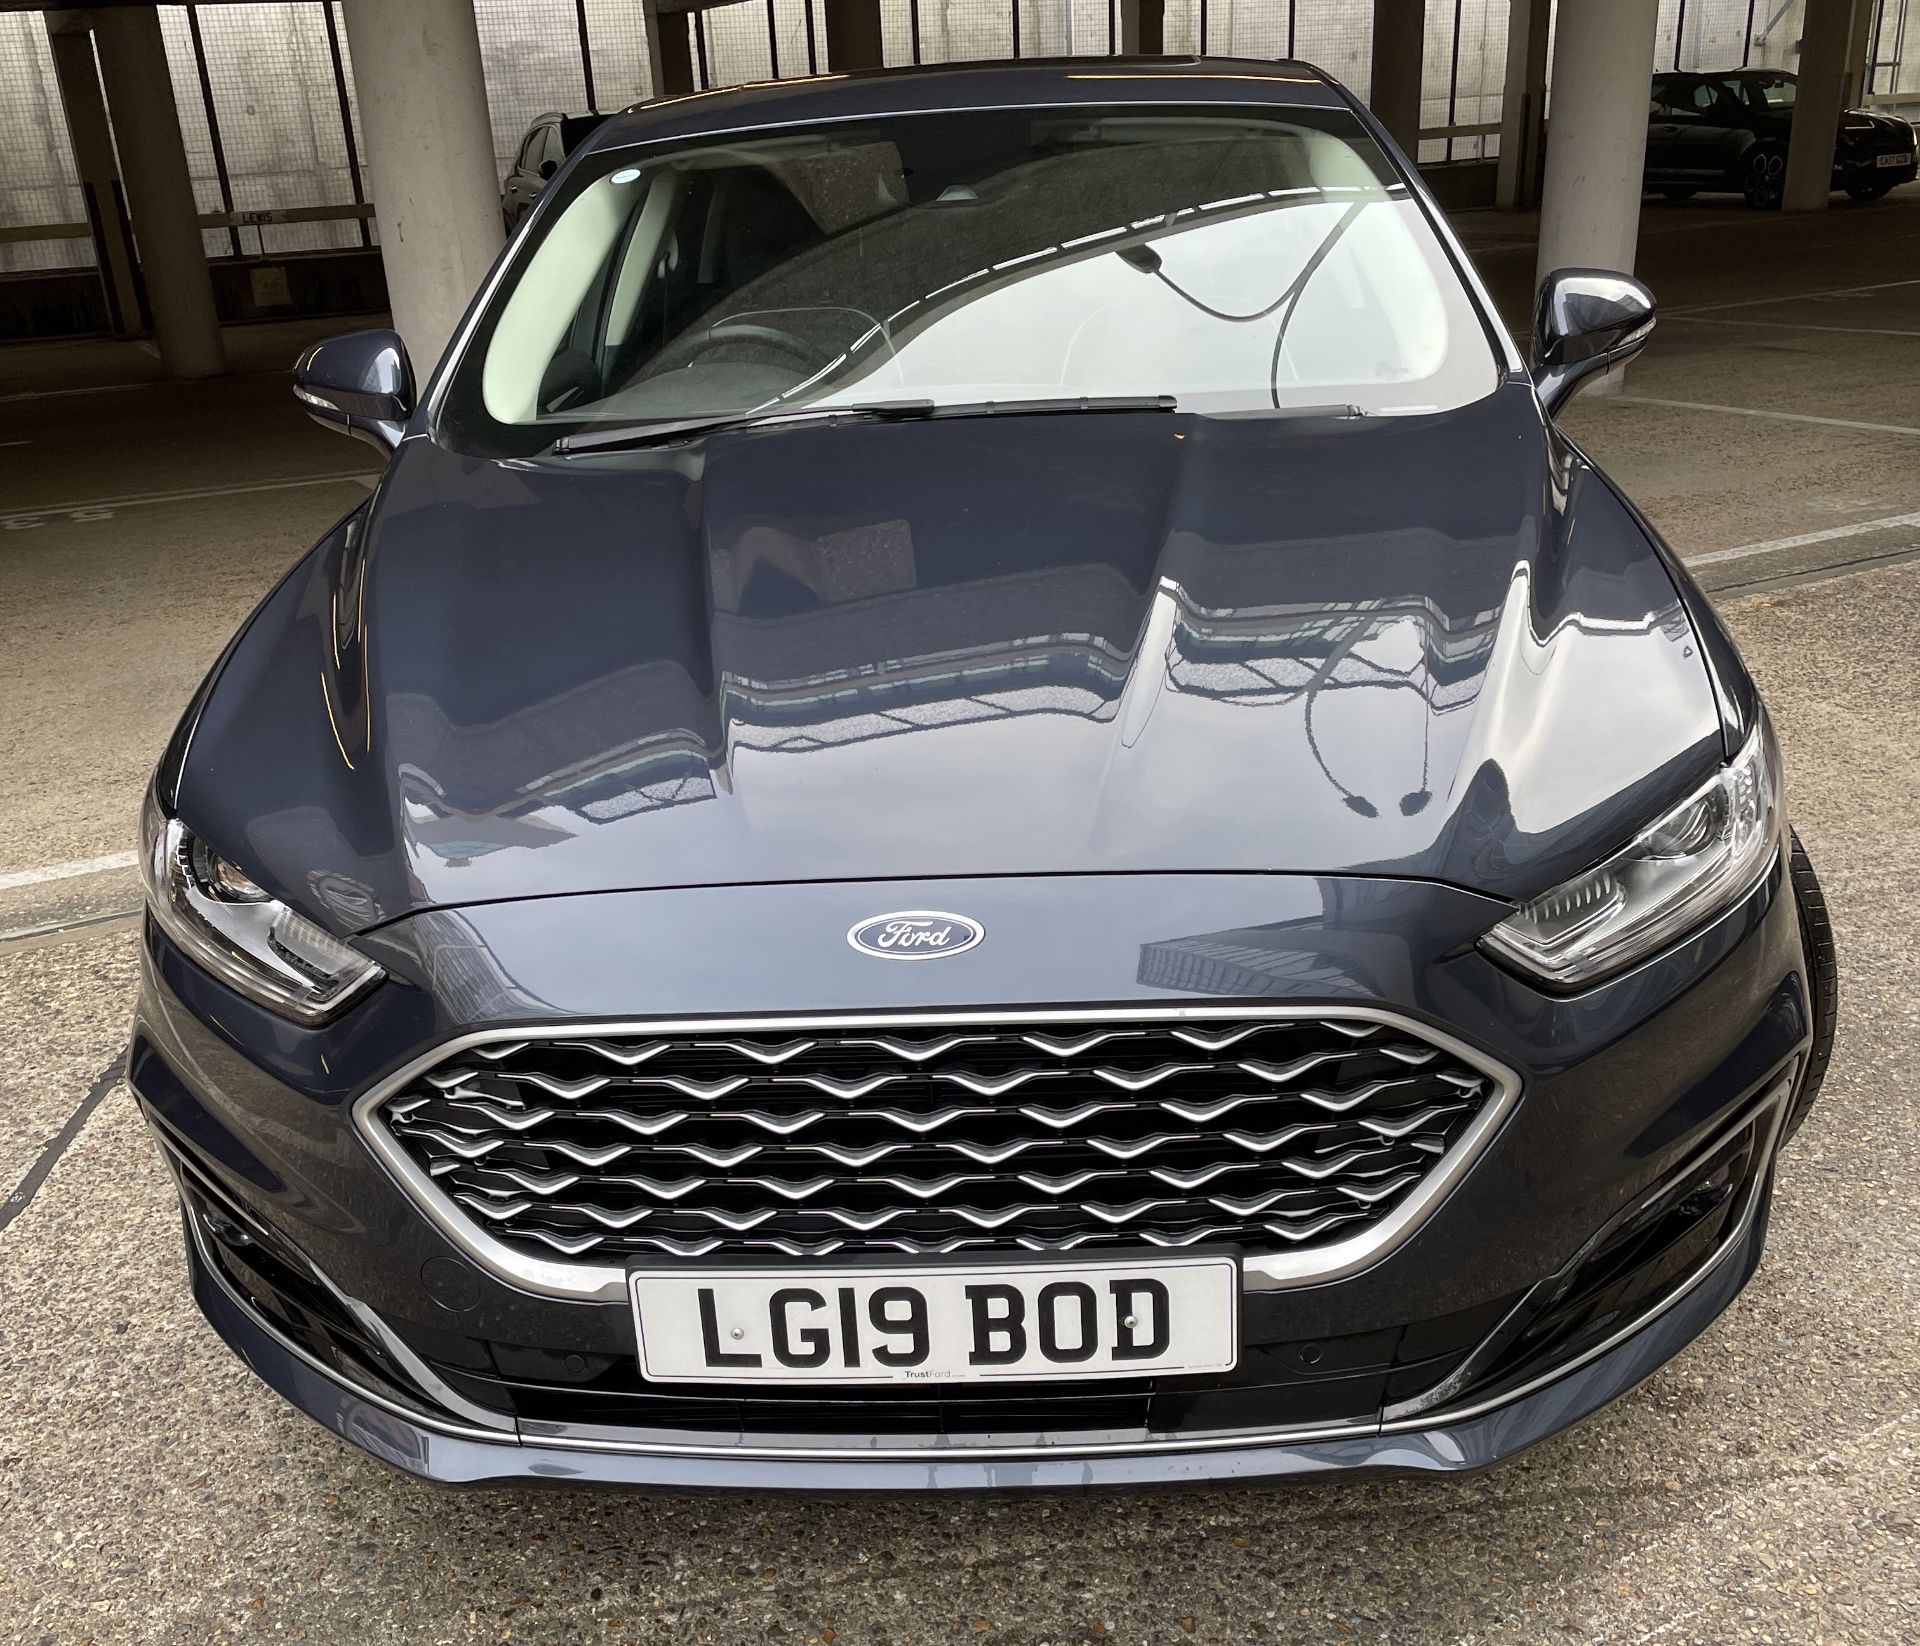 Ford Mondeo Vignale Saloon 2.0 Hybrid 4dr Auto, Registration LG19 BOD, First Registered 29th July - Image 19 of 23